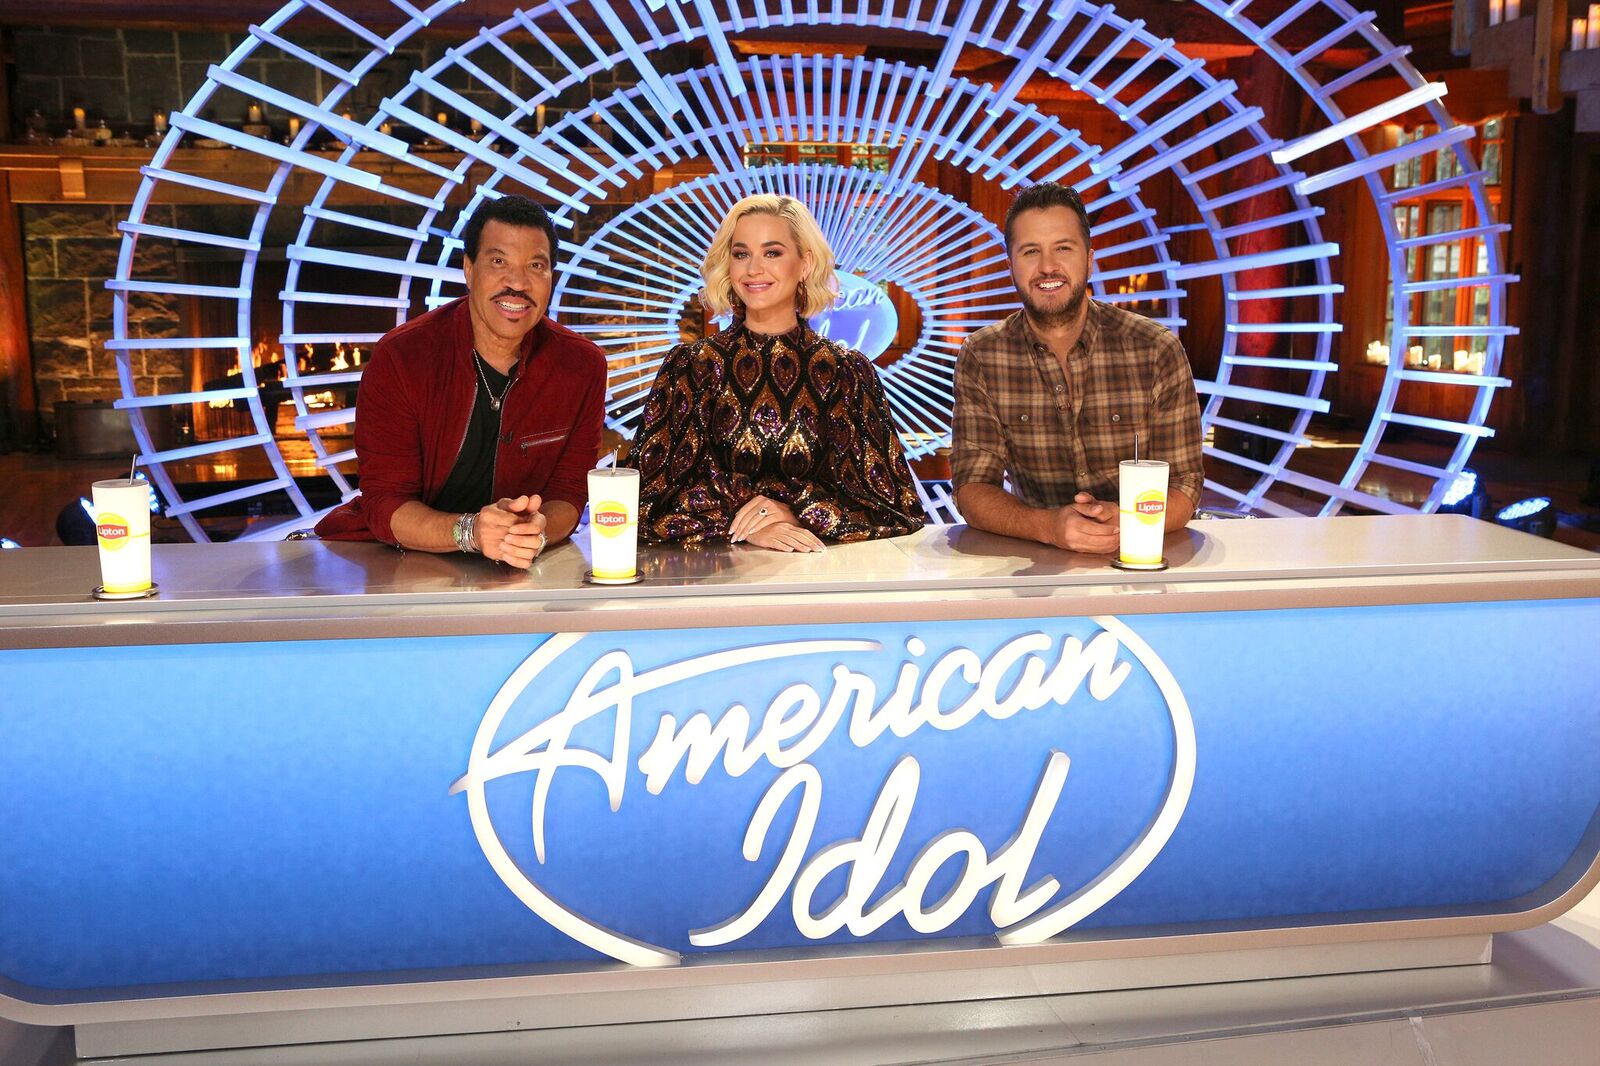 Lionel Richie, Katy Perry, and Luke Bryan on the set of "American Idol" season 3. Image uploaded on November 08, 2019 | Photo: Scott Patrick Green/ABC/Getty Images